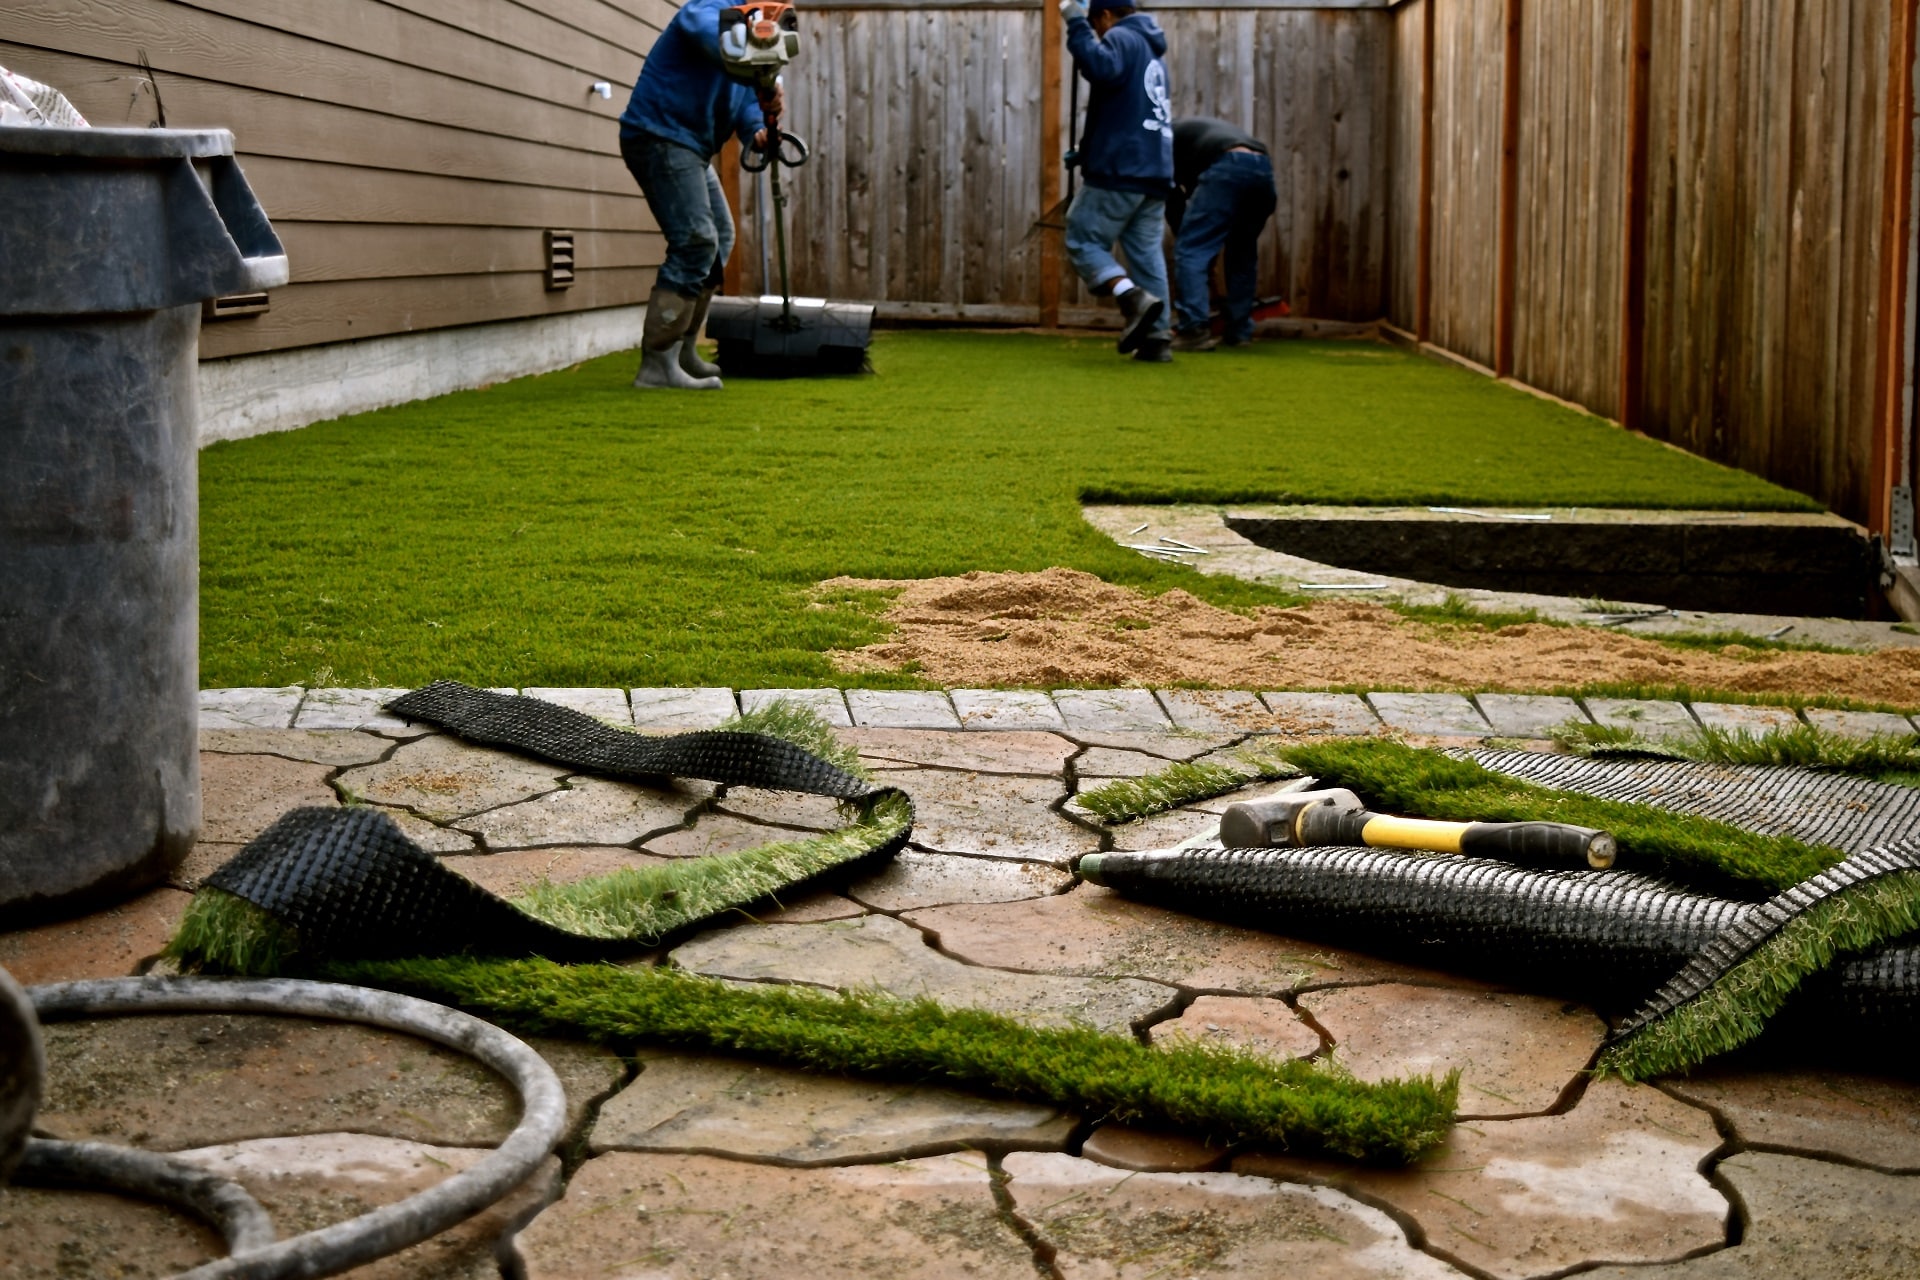 How Does HydroChill Technology Work in Artificial Grass?